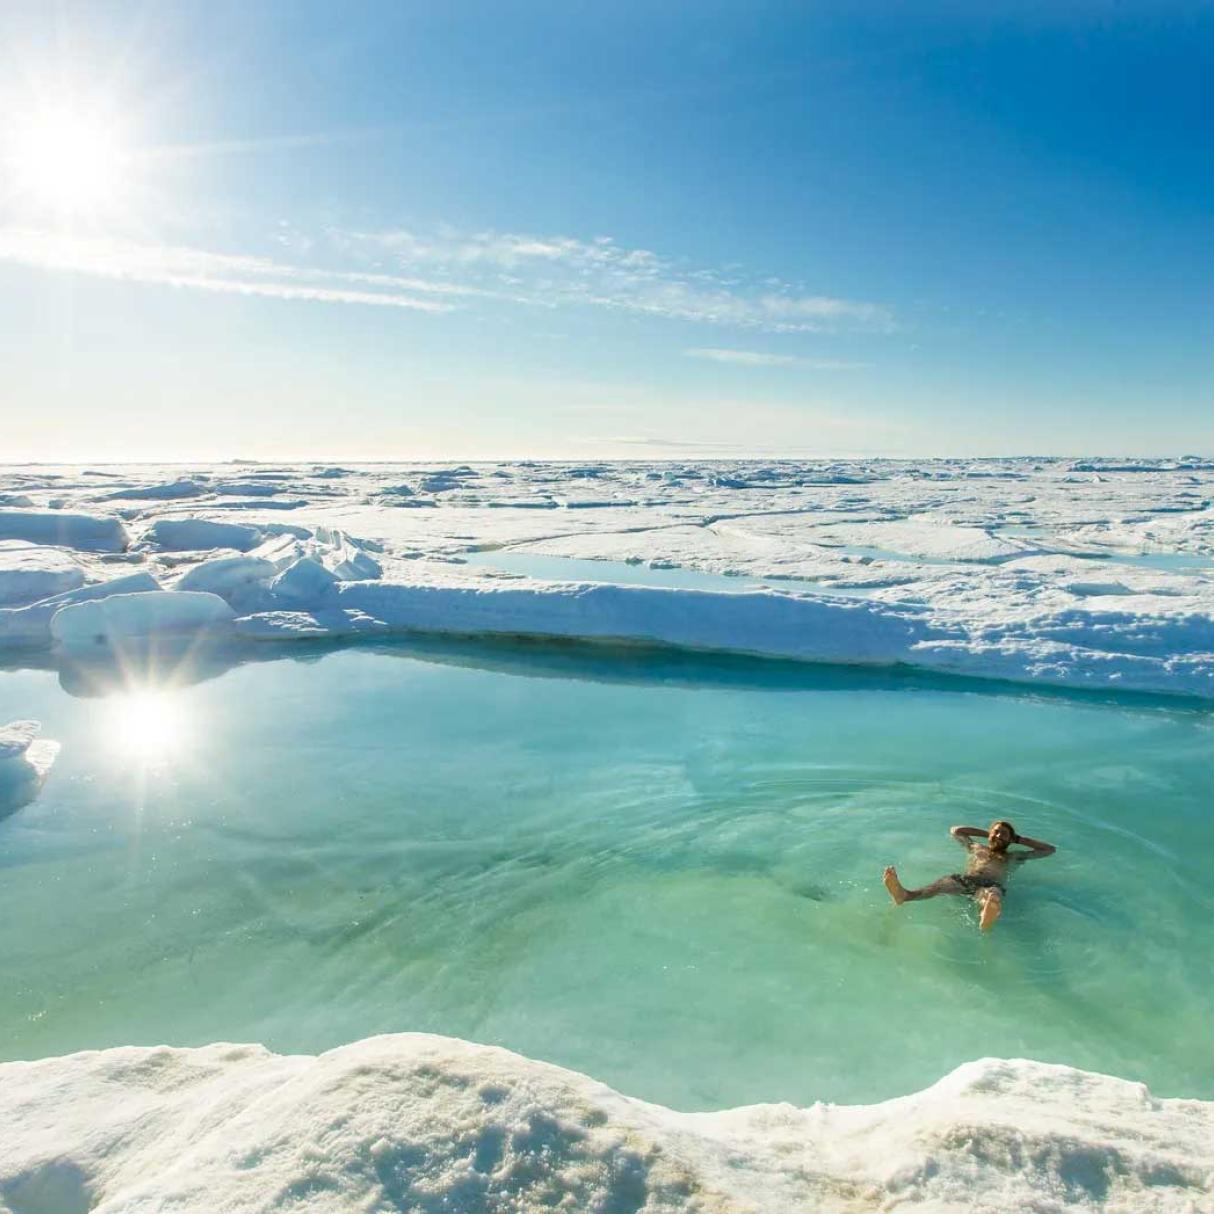 A person with swim shorts sits in a turquoise glacial pool of water surrounded by tundra ice and snow.